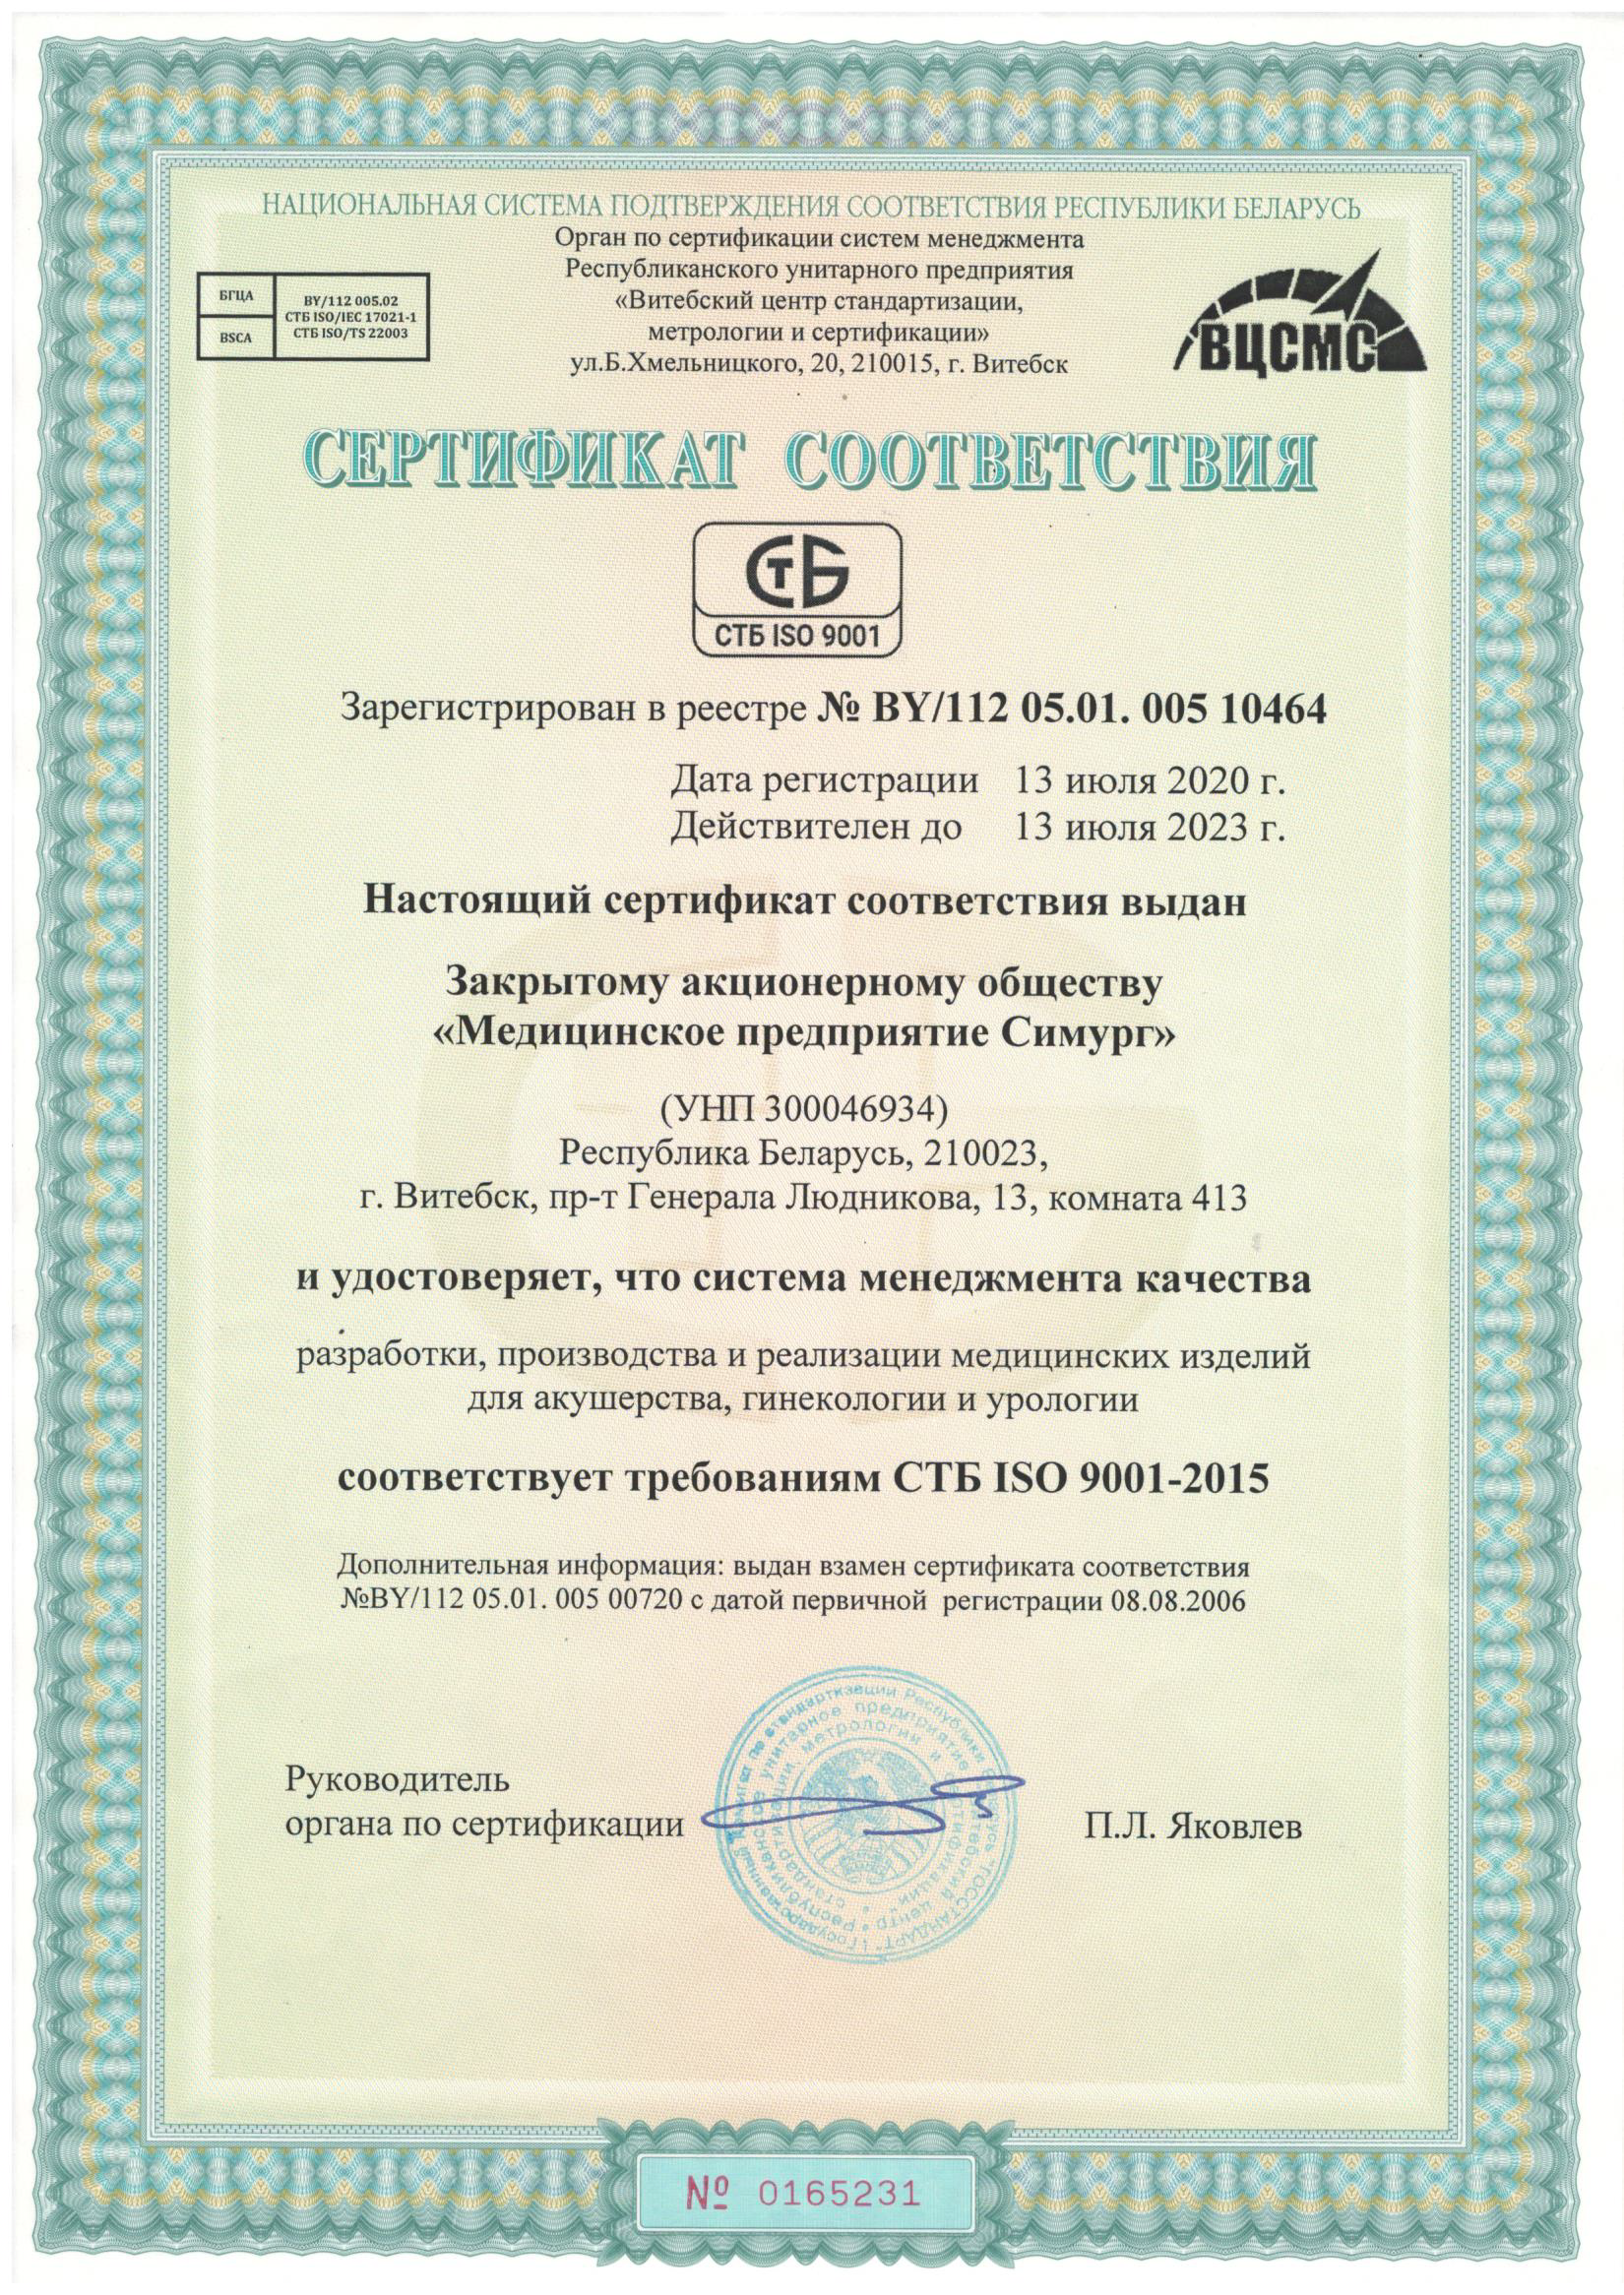 2020 stb iso 9001 1